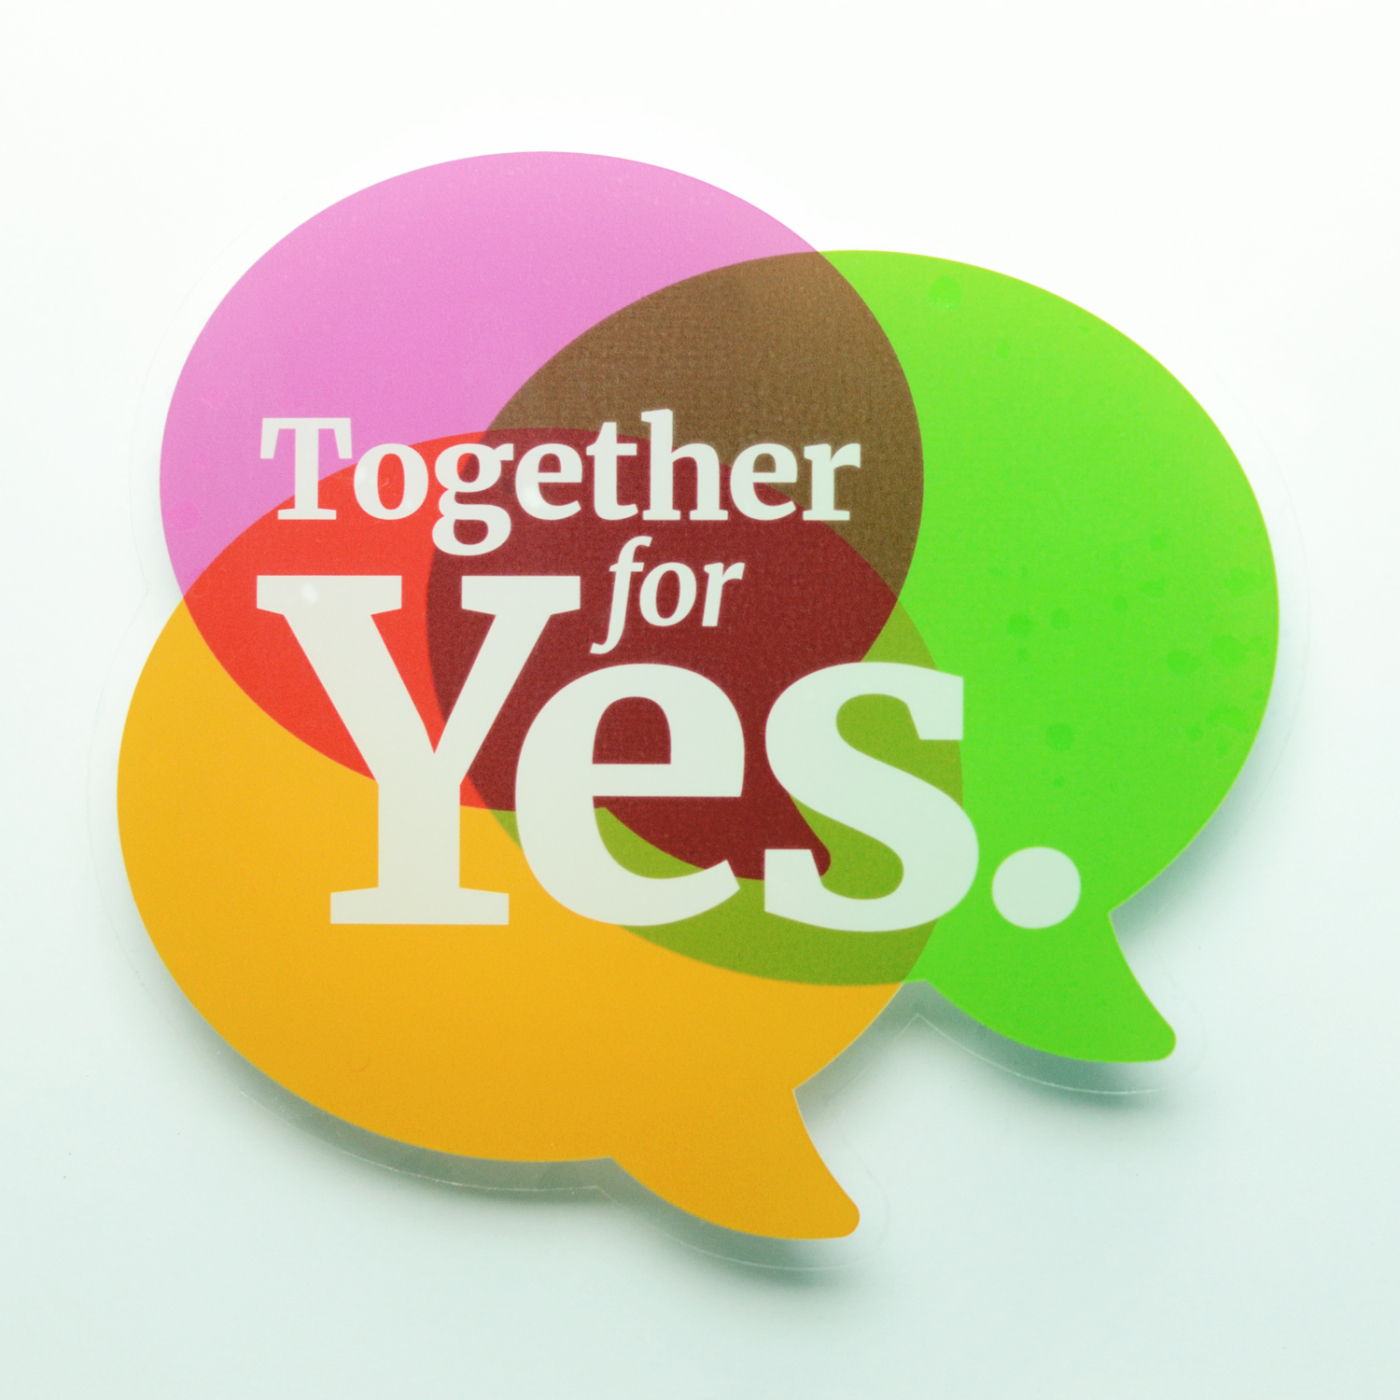 Together for Yes – gronya.com